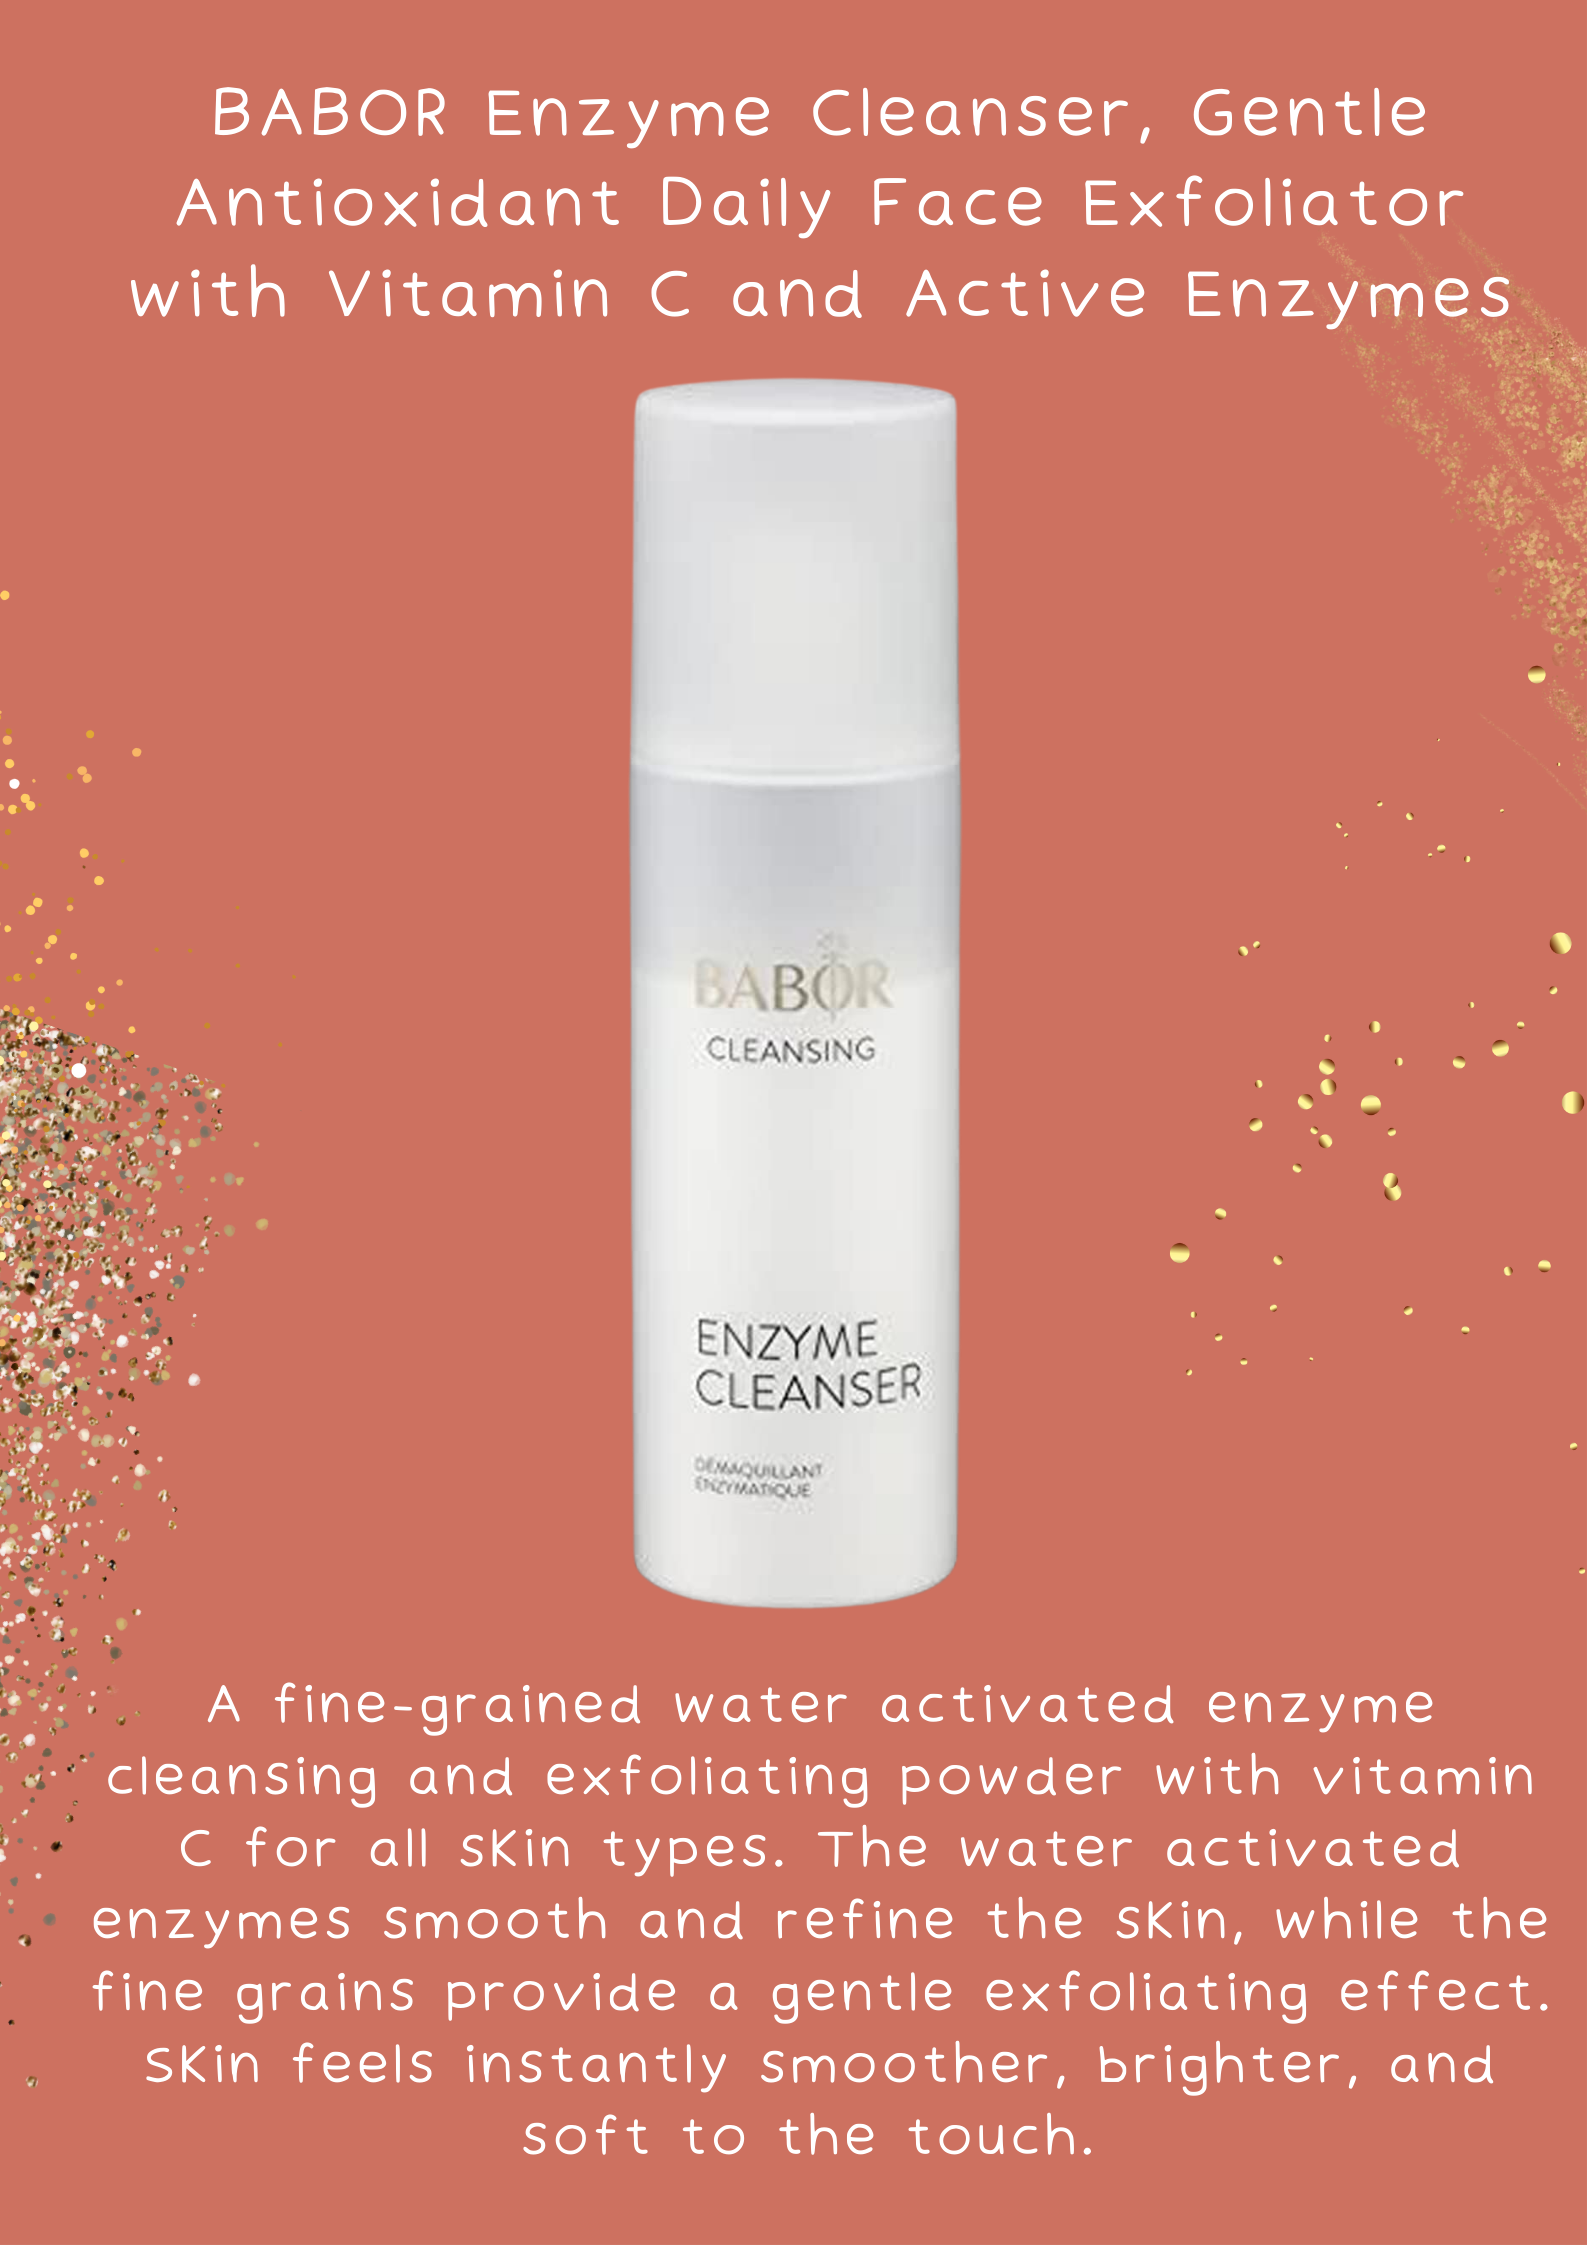 BABOR Enzyme Cleanser, Gentle Antioxidant Daily Face Exfoliator, with Vitamin C and Active Enzymes